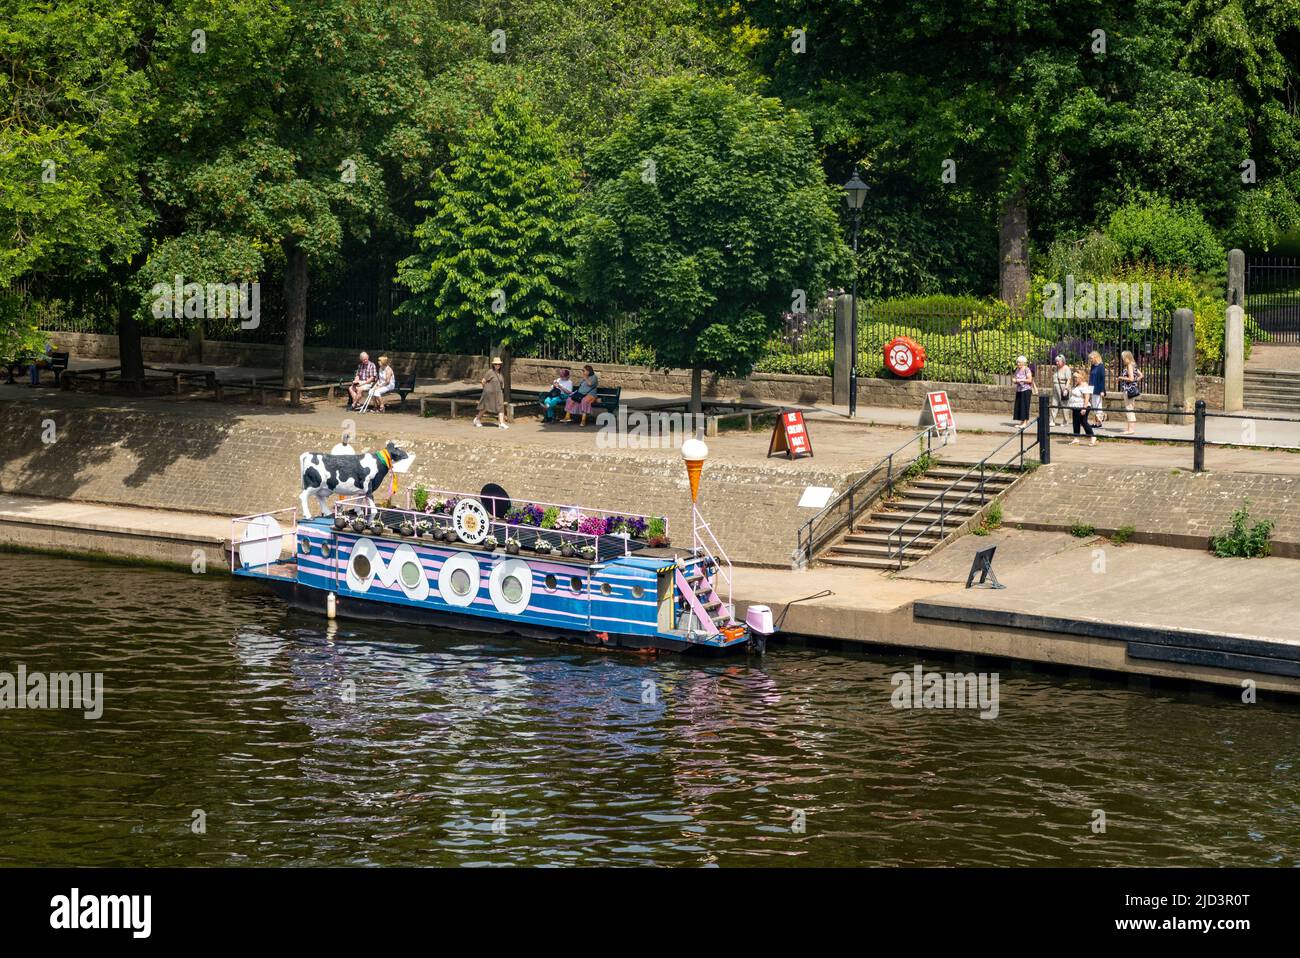 Small tour boat docked at Lendal Bridge Landing on the River Ouse in York, England Stock Photo